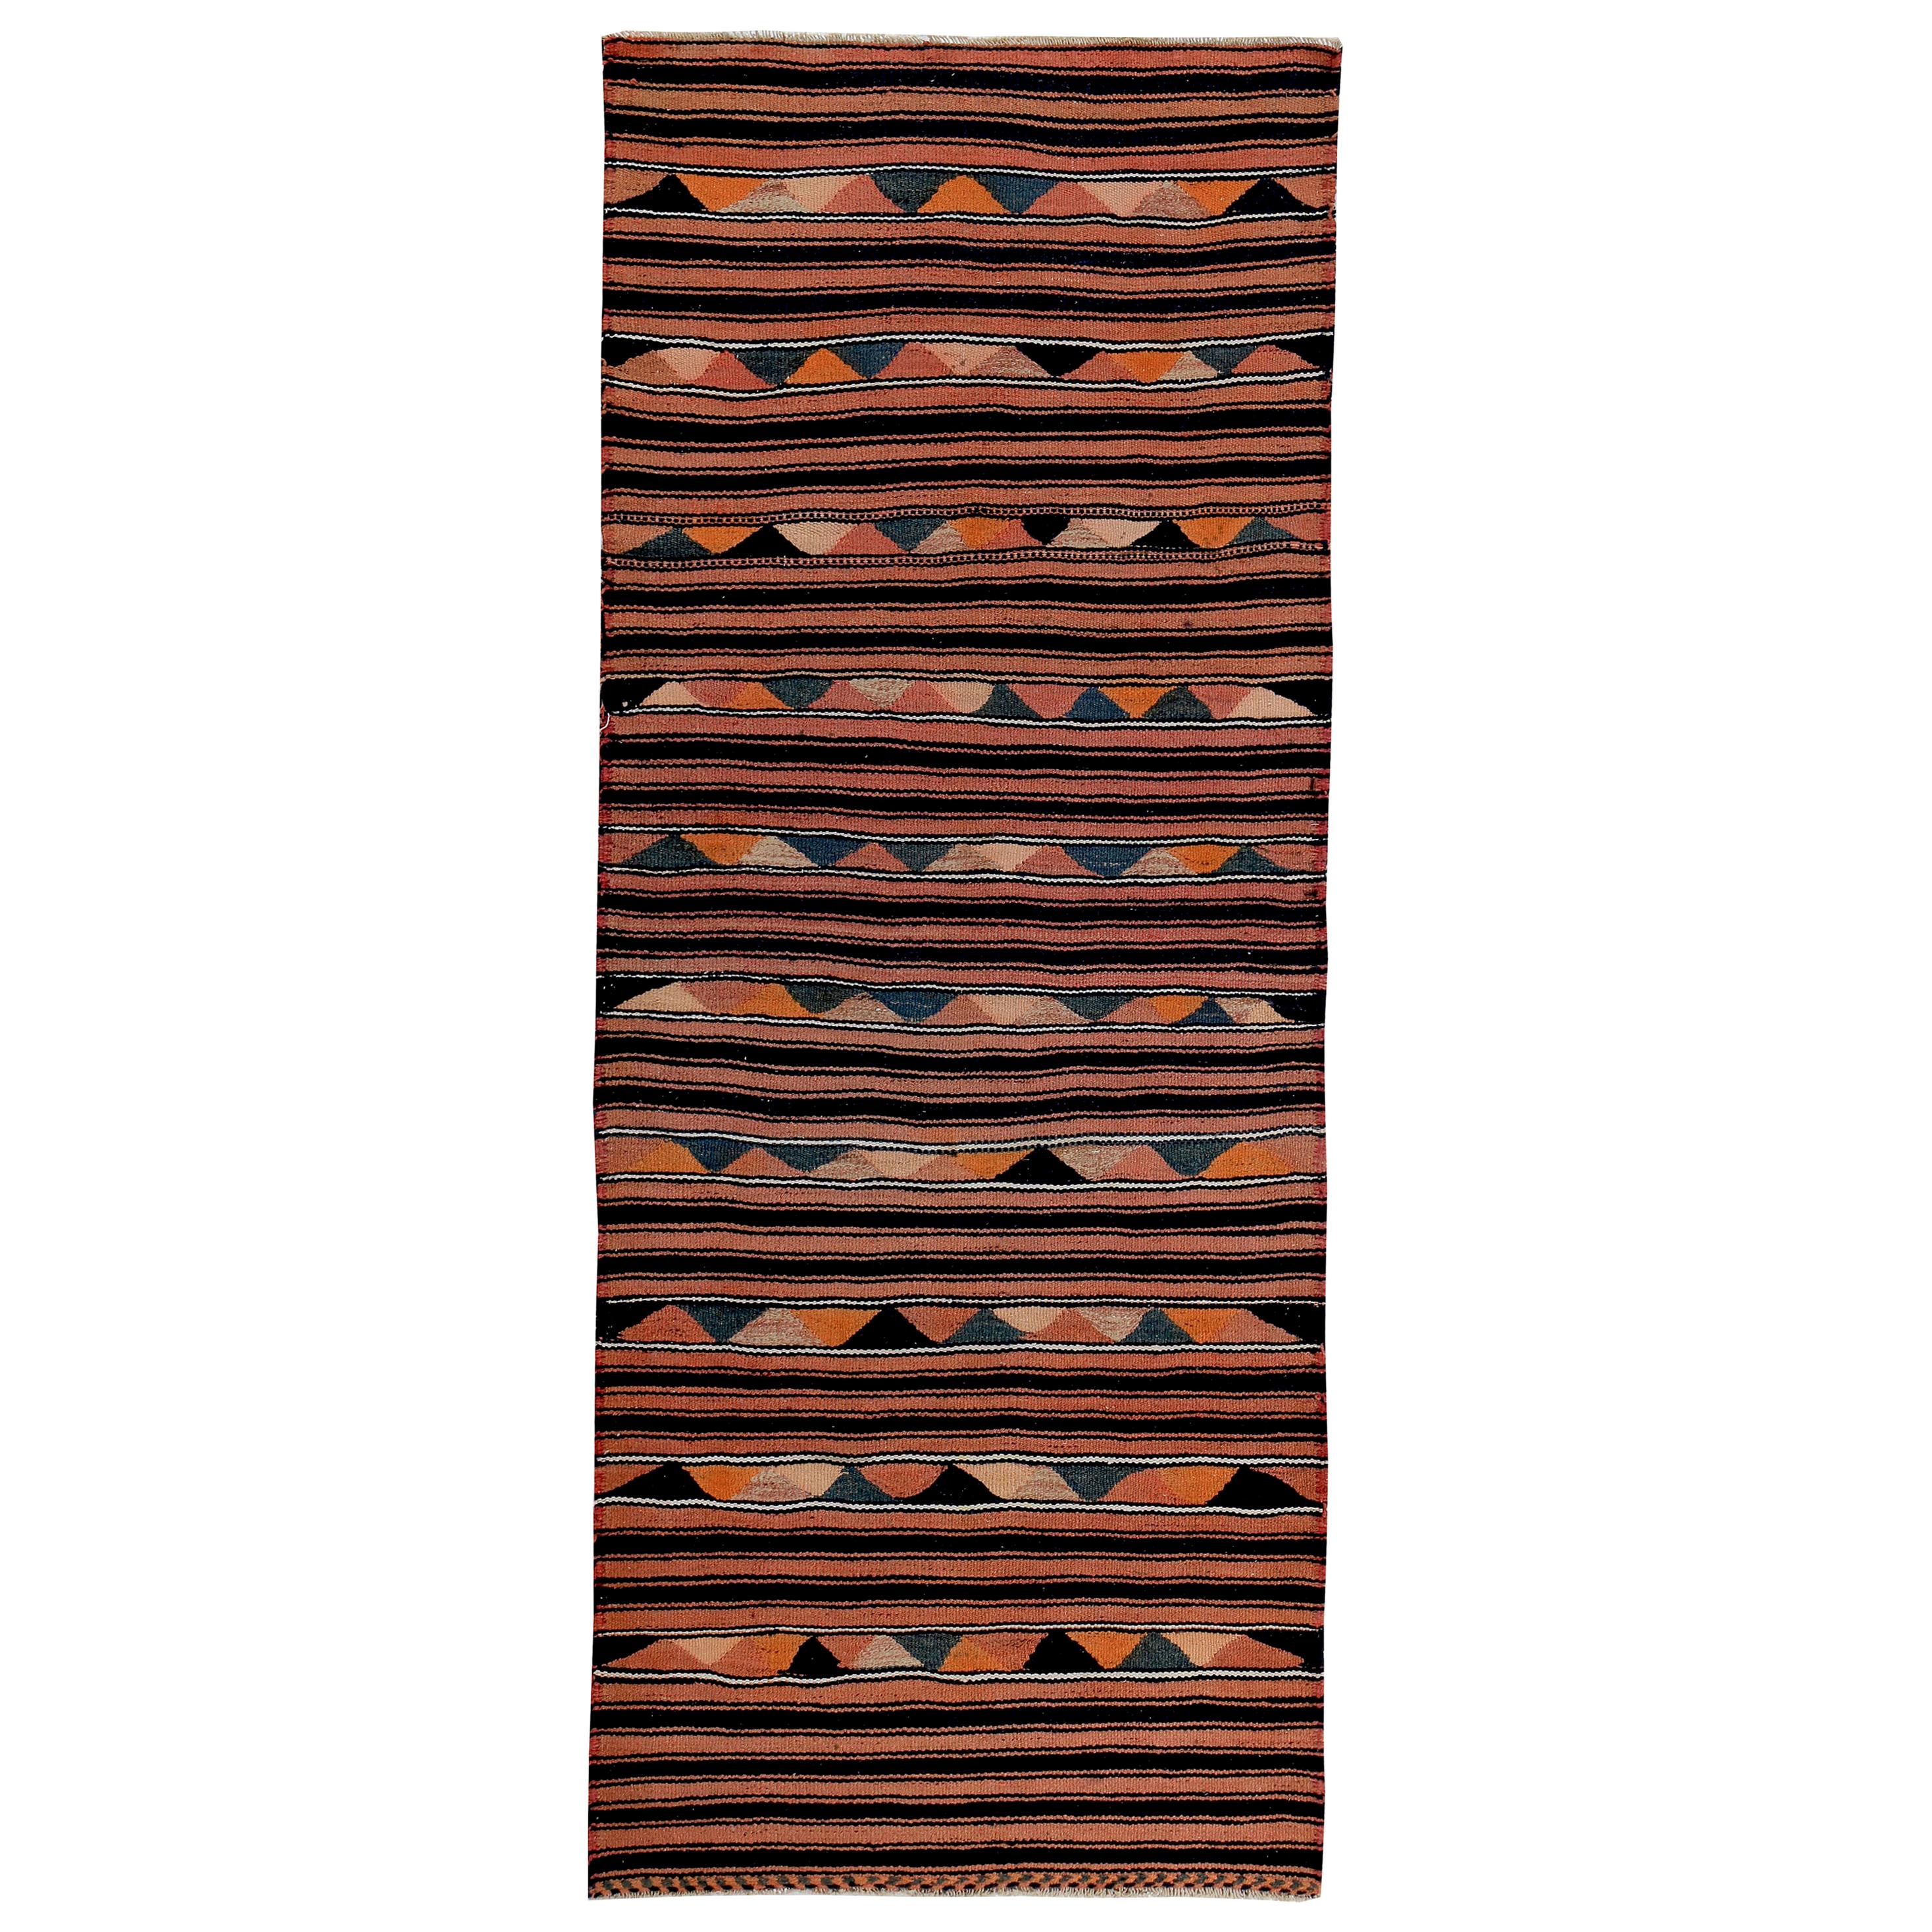 Turkish Kilim Runner Rug with Tribal Details in Red, Black and Orange For Sale